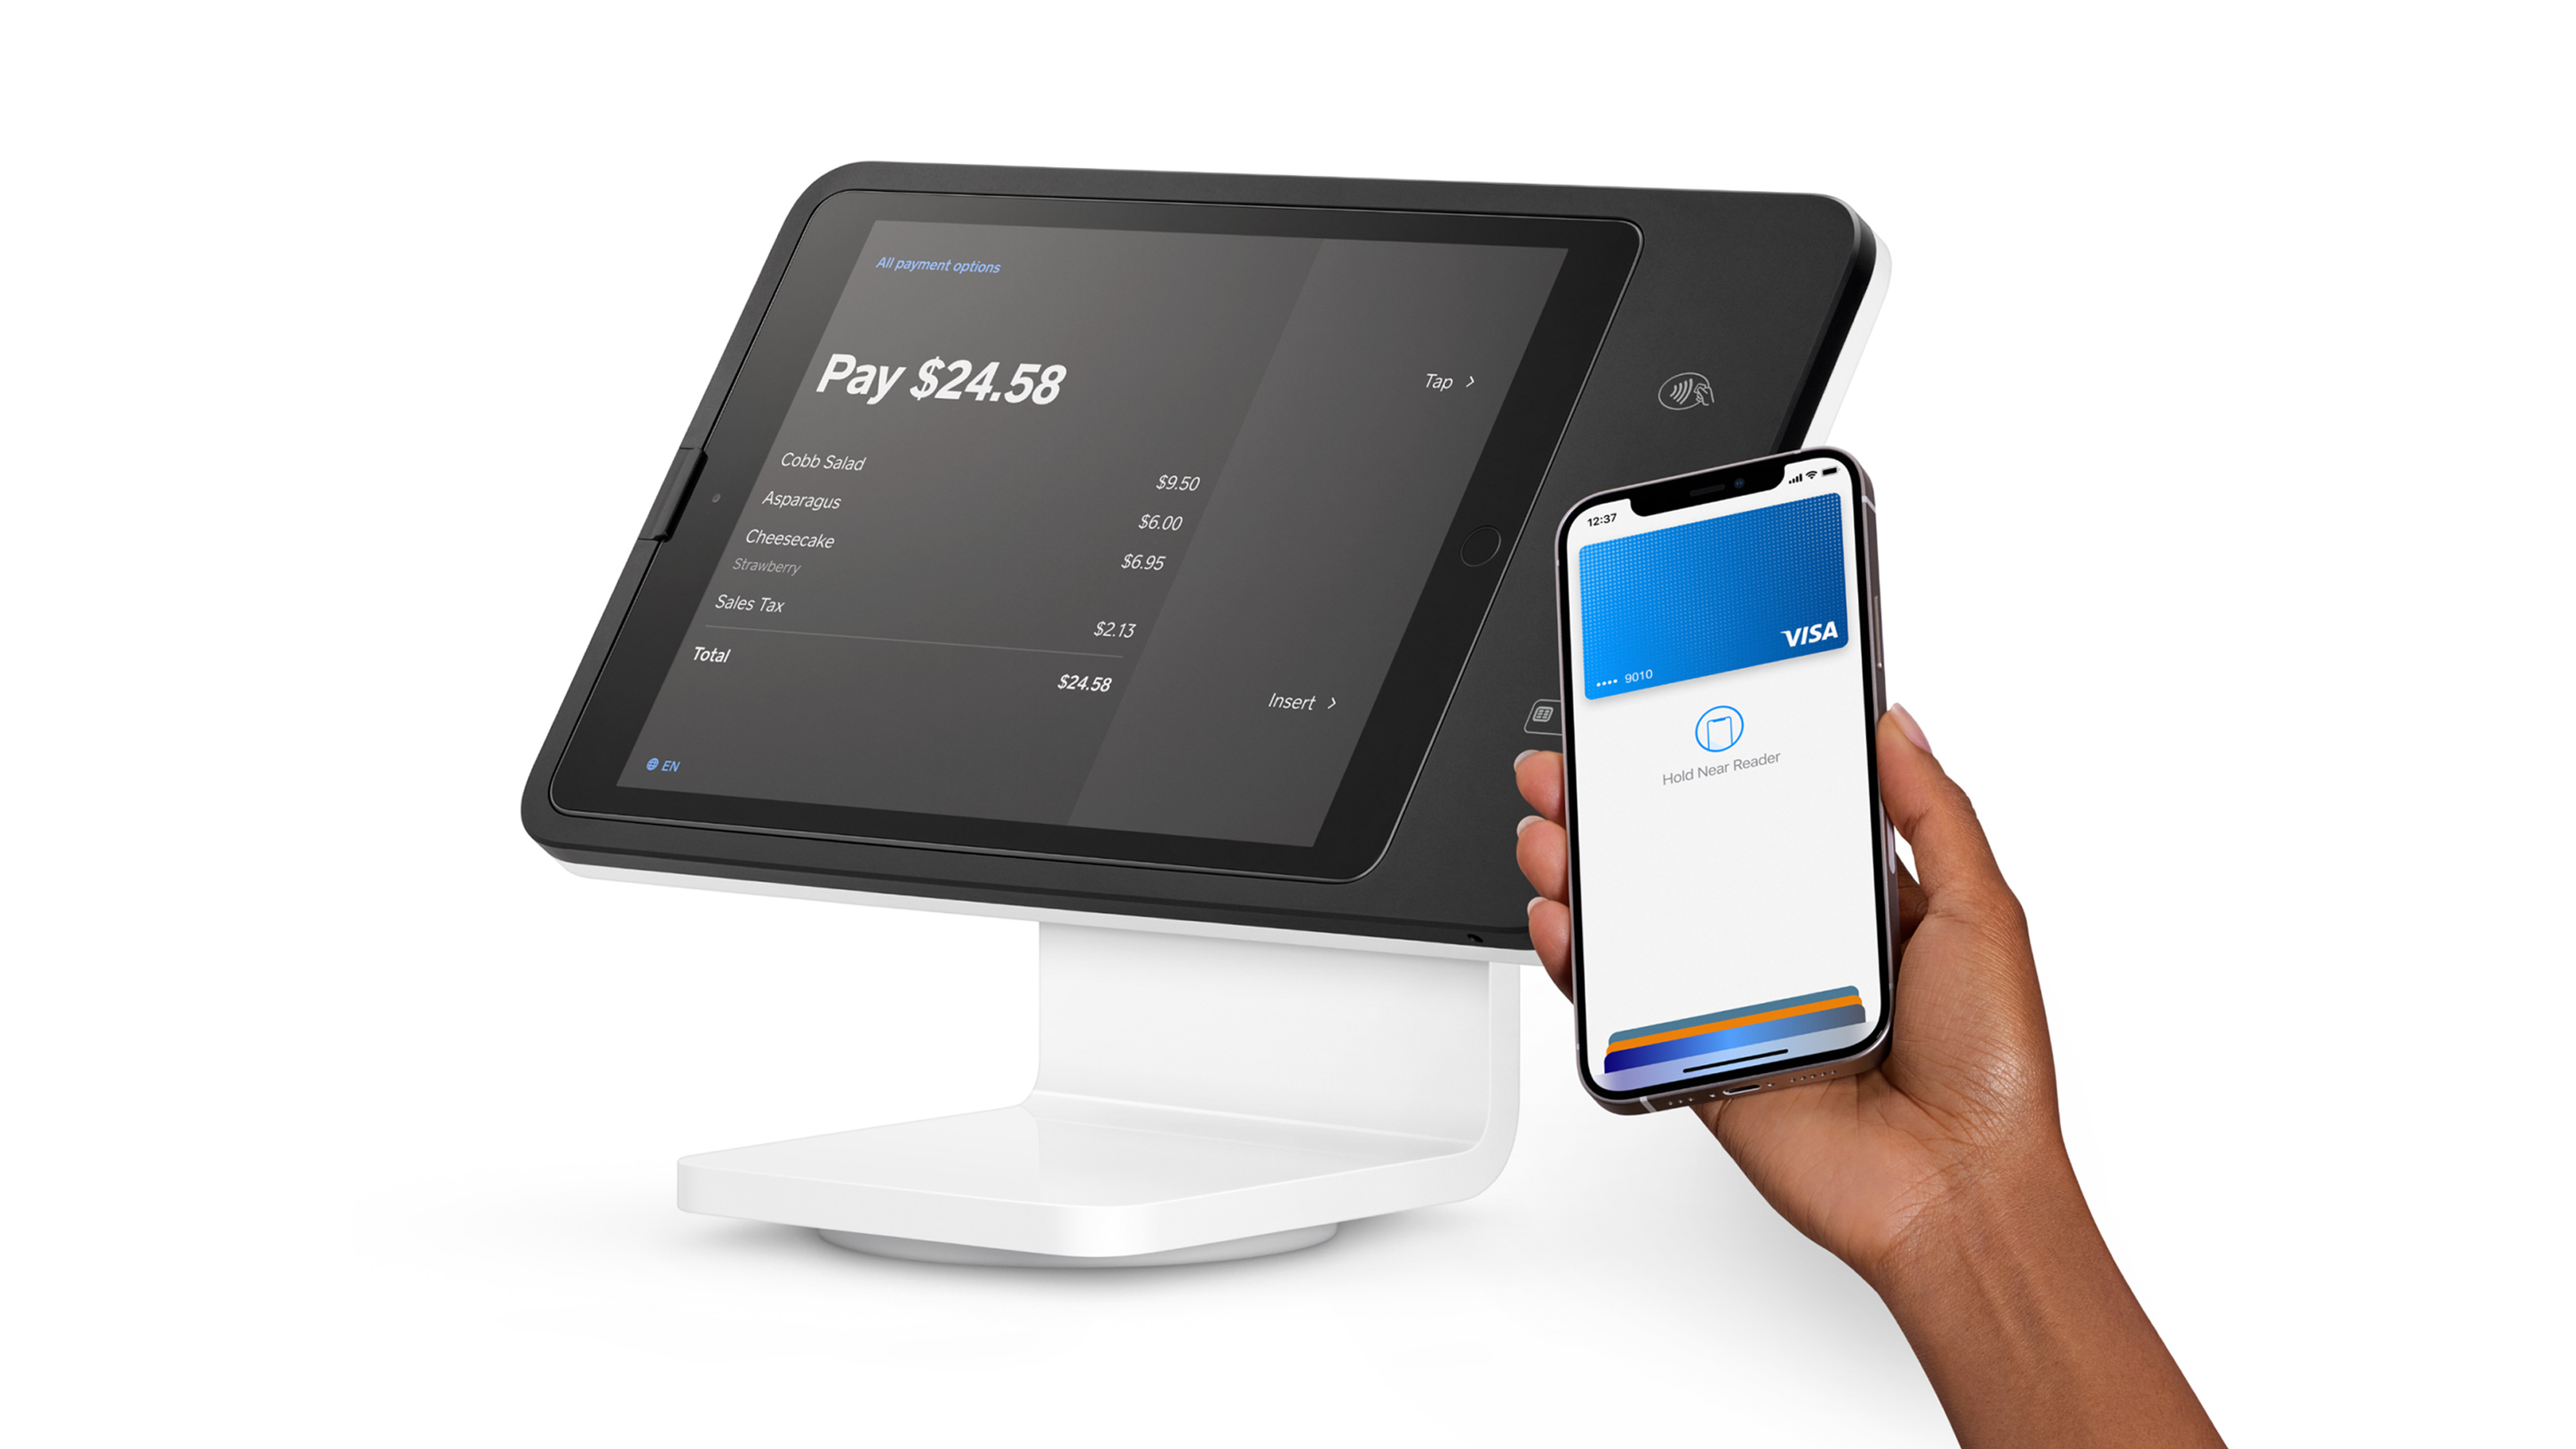 Block unveils new Square Stand for iPad with NFC card reader - 9to5Mac